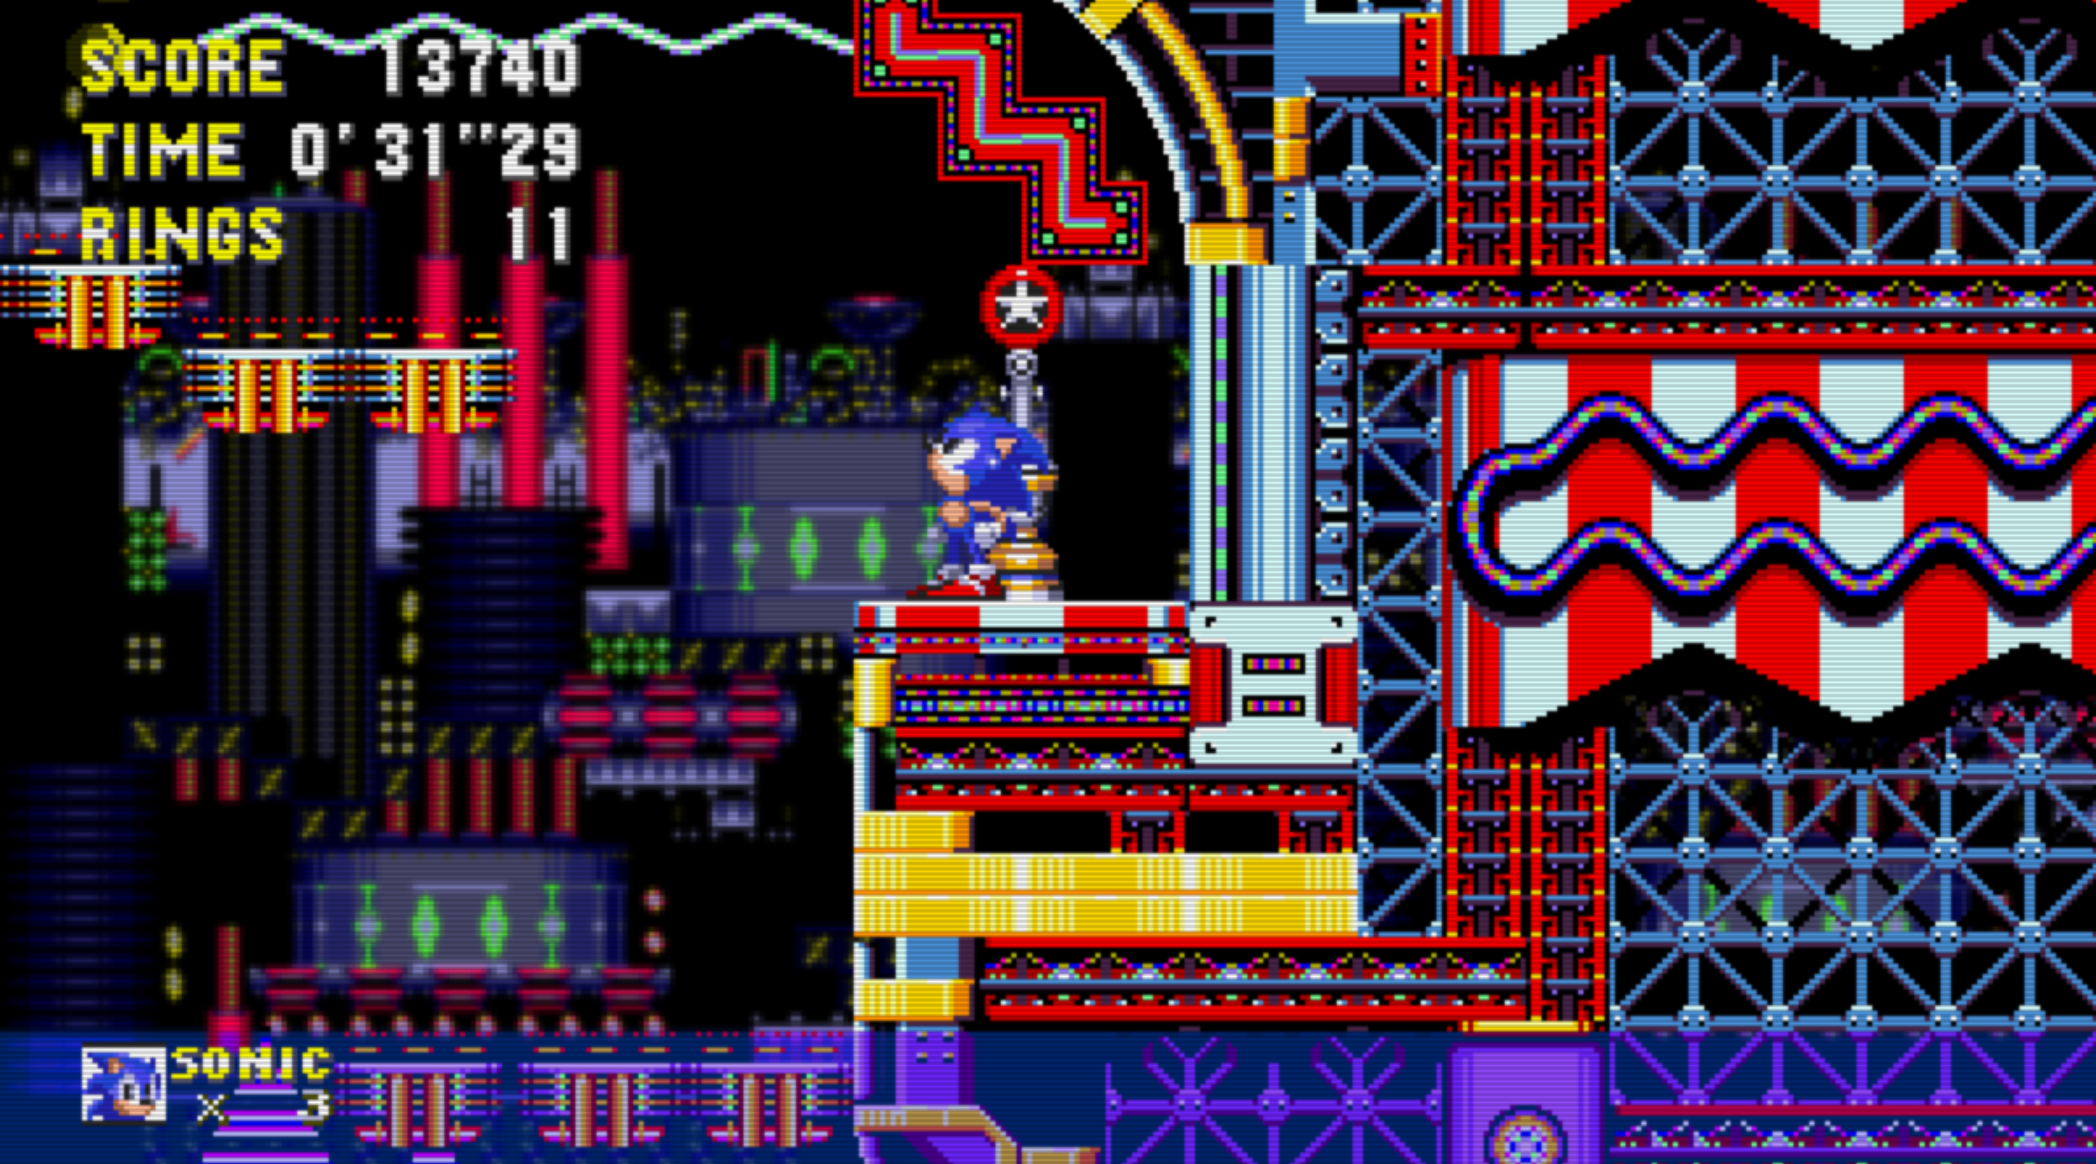 Sonic 3 Air. Sonic 3 Air ROM. Sonic 3 and Knuckles ROM АИР. Sonic 3 Air Android. Uzmovi com sonic 3